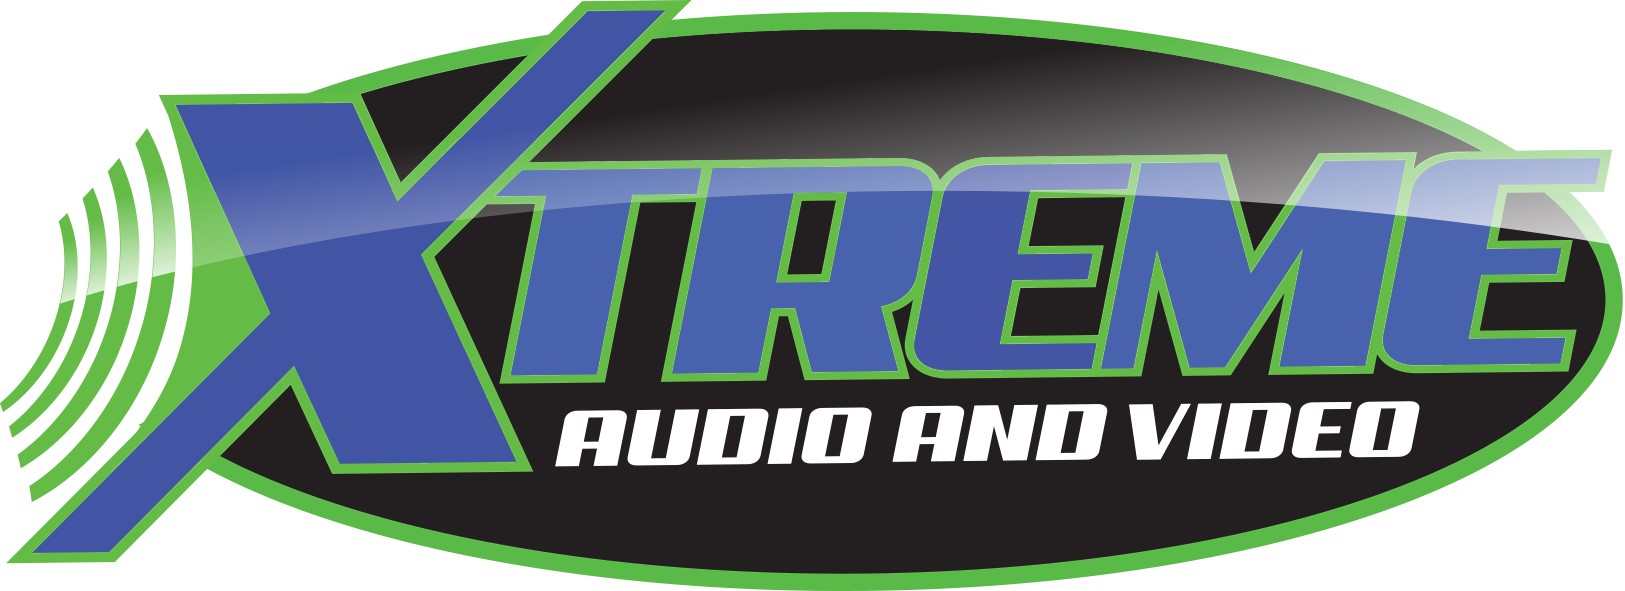 Xtreme Audio and Video